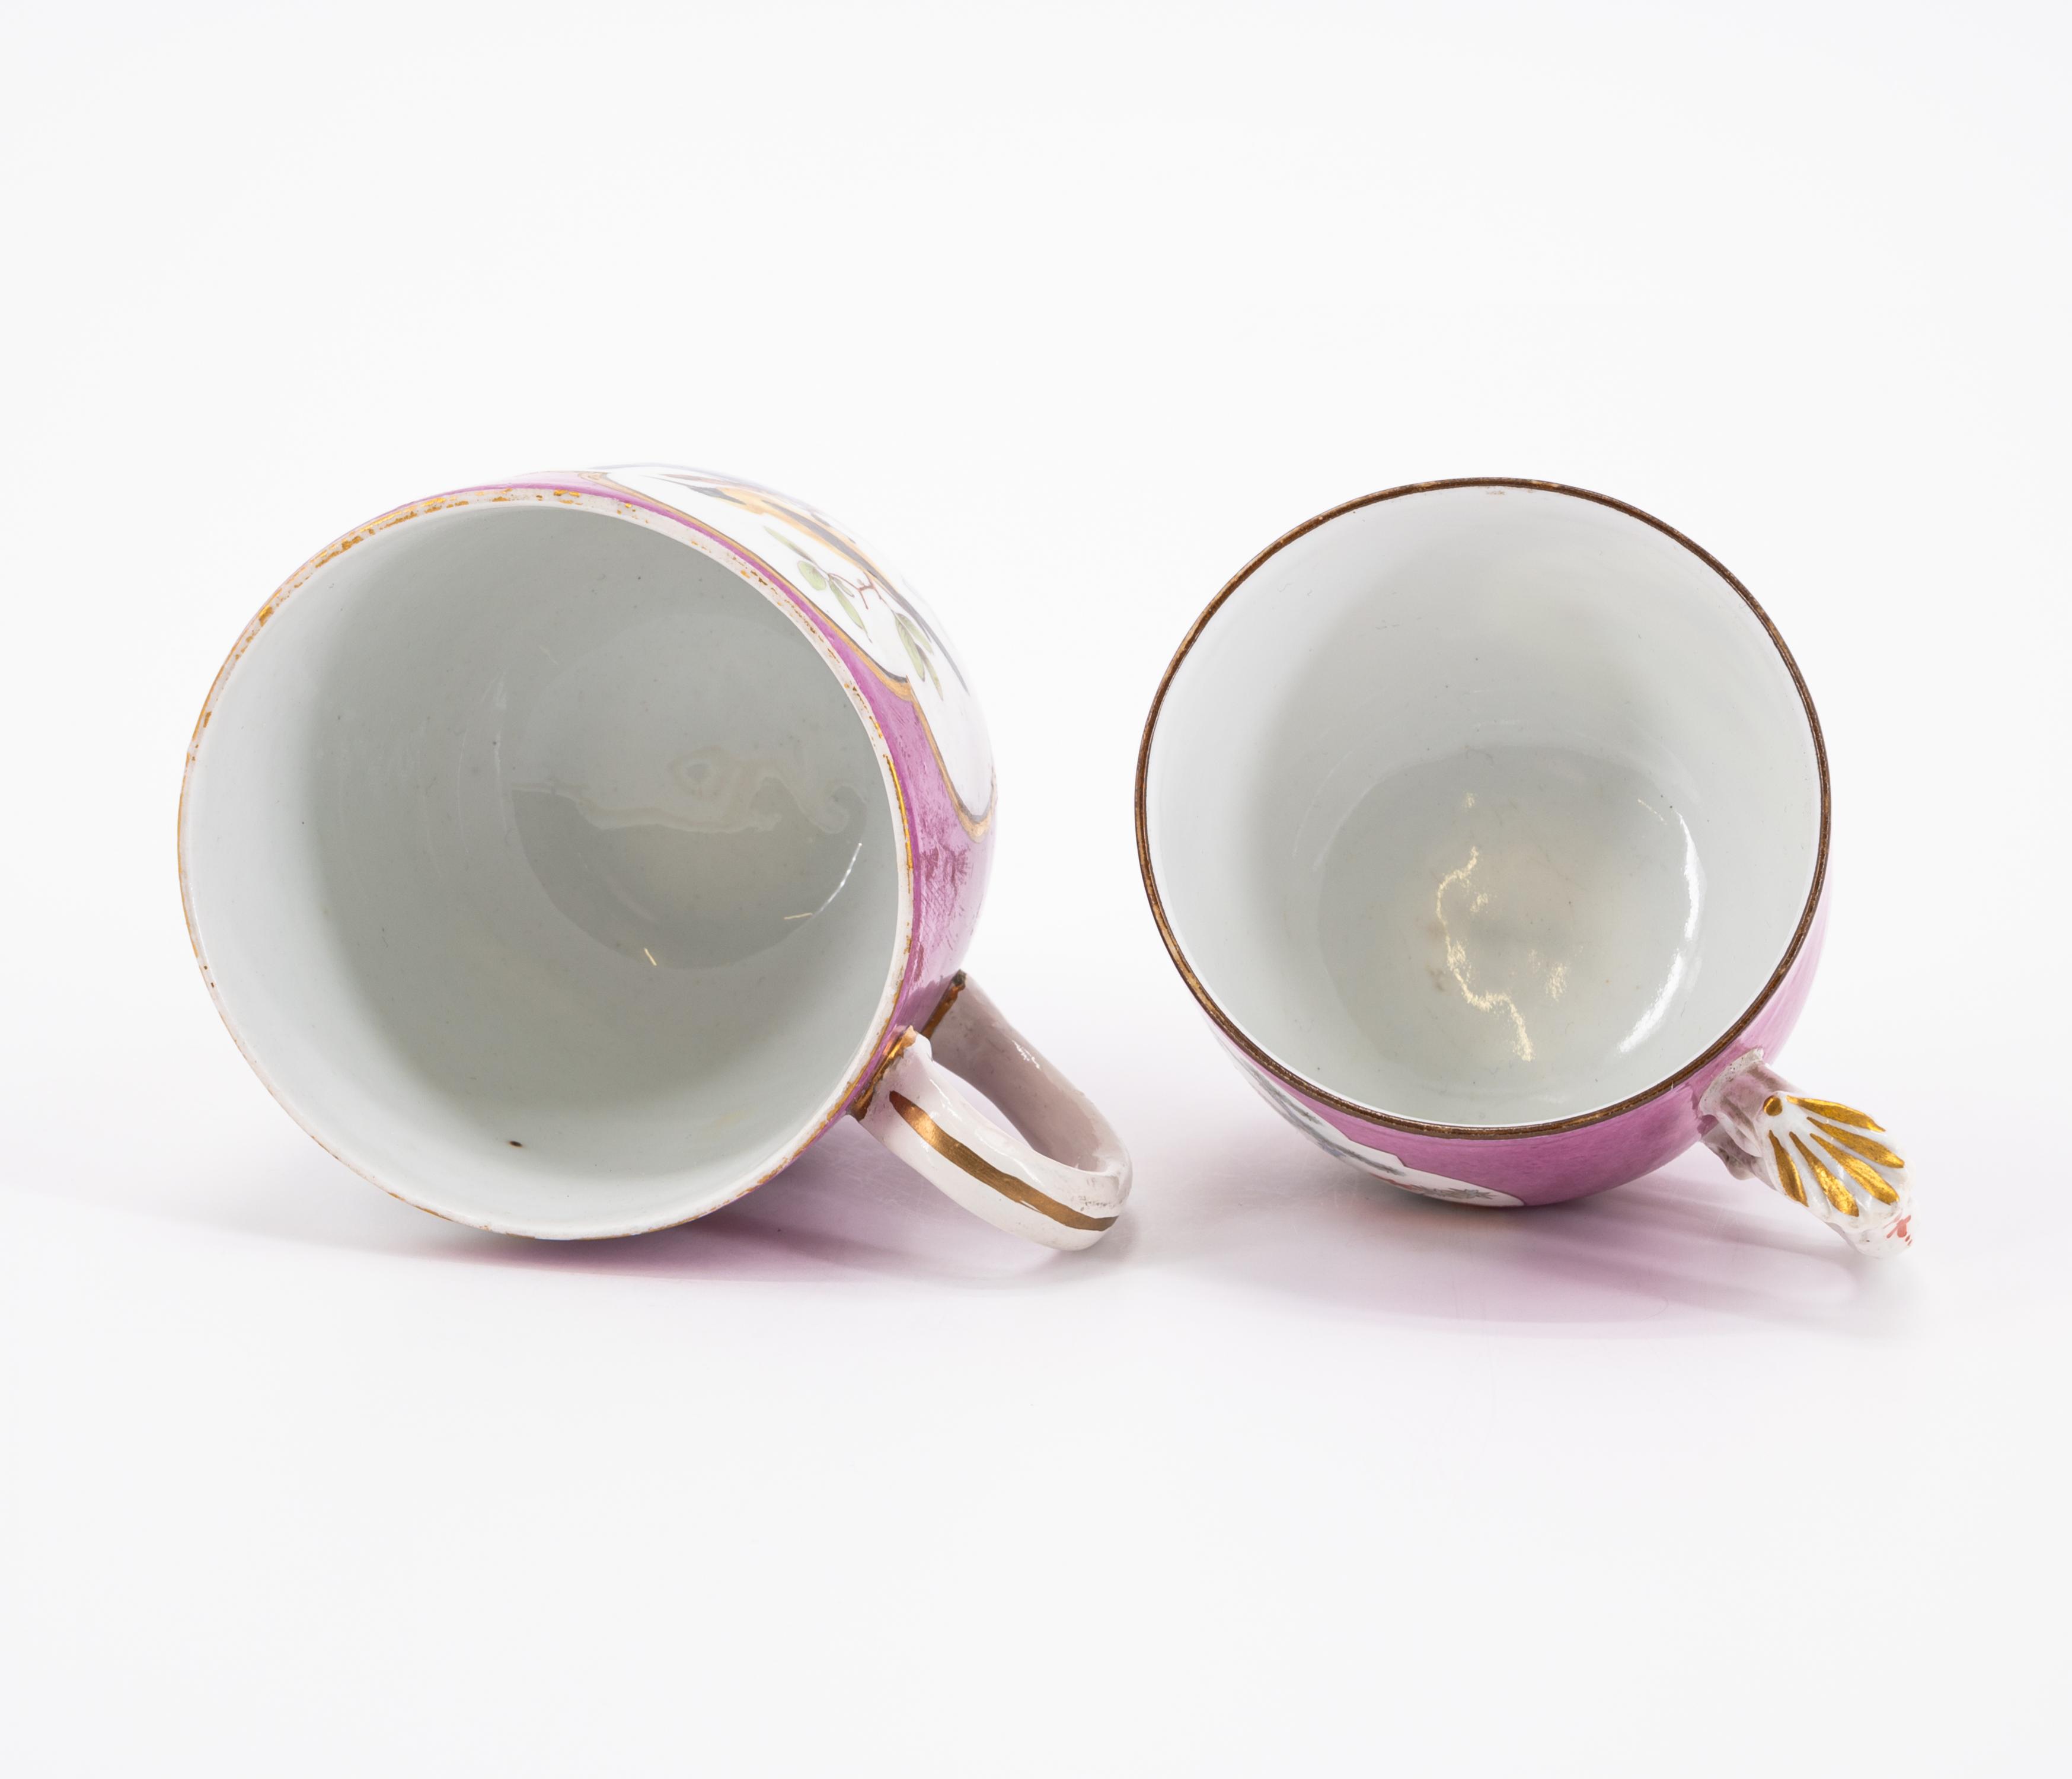 ONE PORCELAIN CUP AND SAUCER WITH QUAIL DECOR & TWO CUPS WITH PURPLE BACKGROUND AND BIRD DECOATIONS - Image 5 of 11